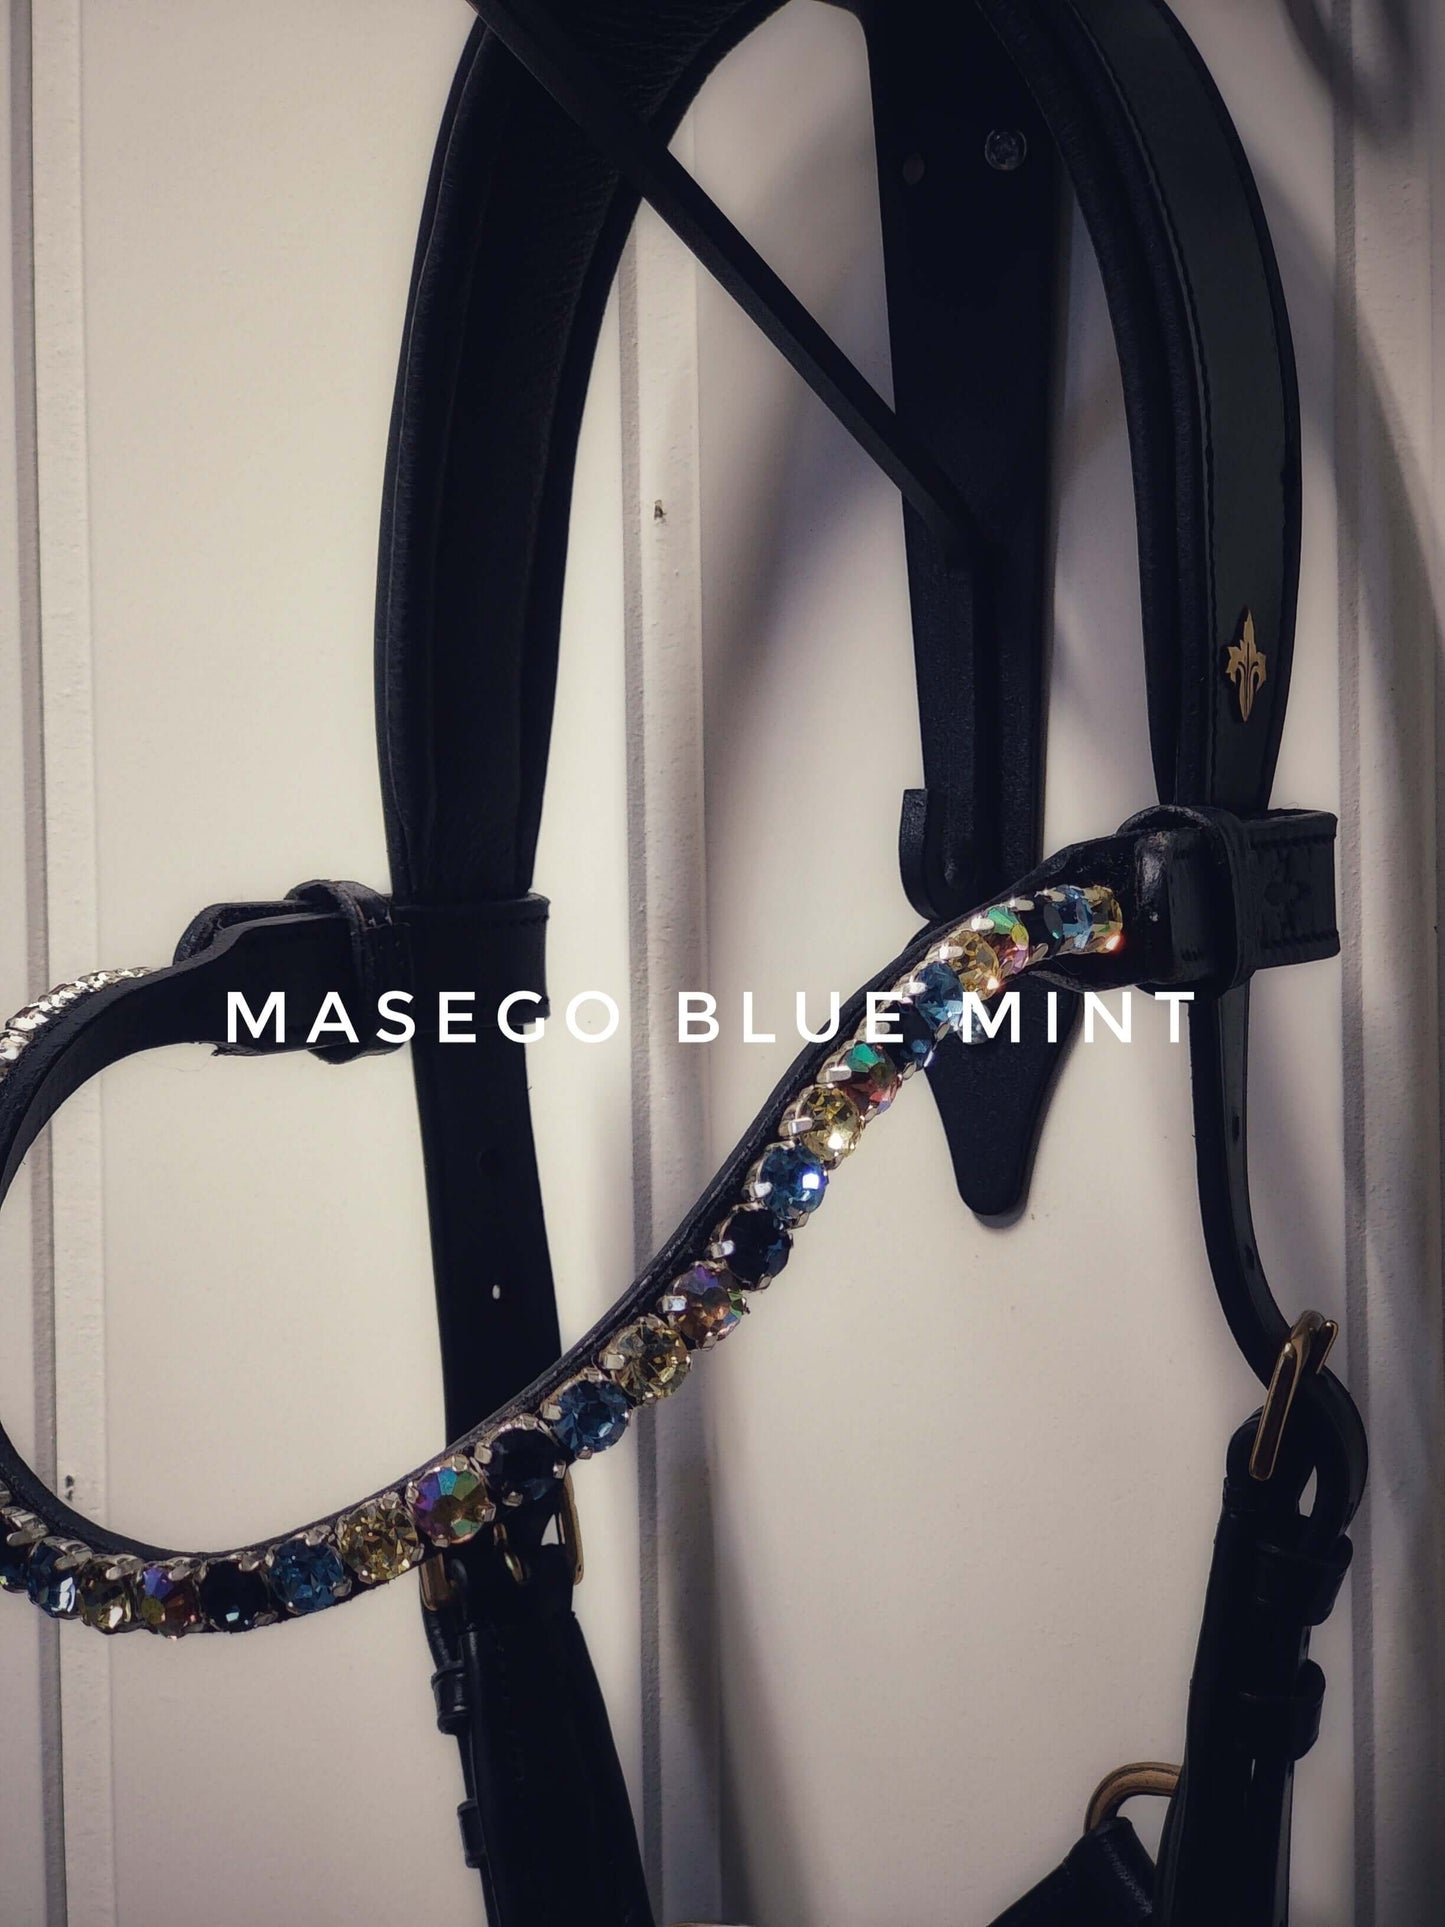 Bit and bitless bridles, halters, riding tights, swarovski browbands and much more